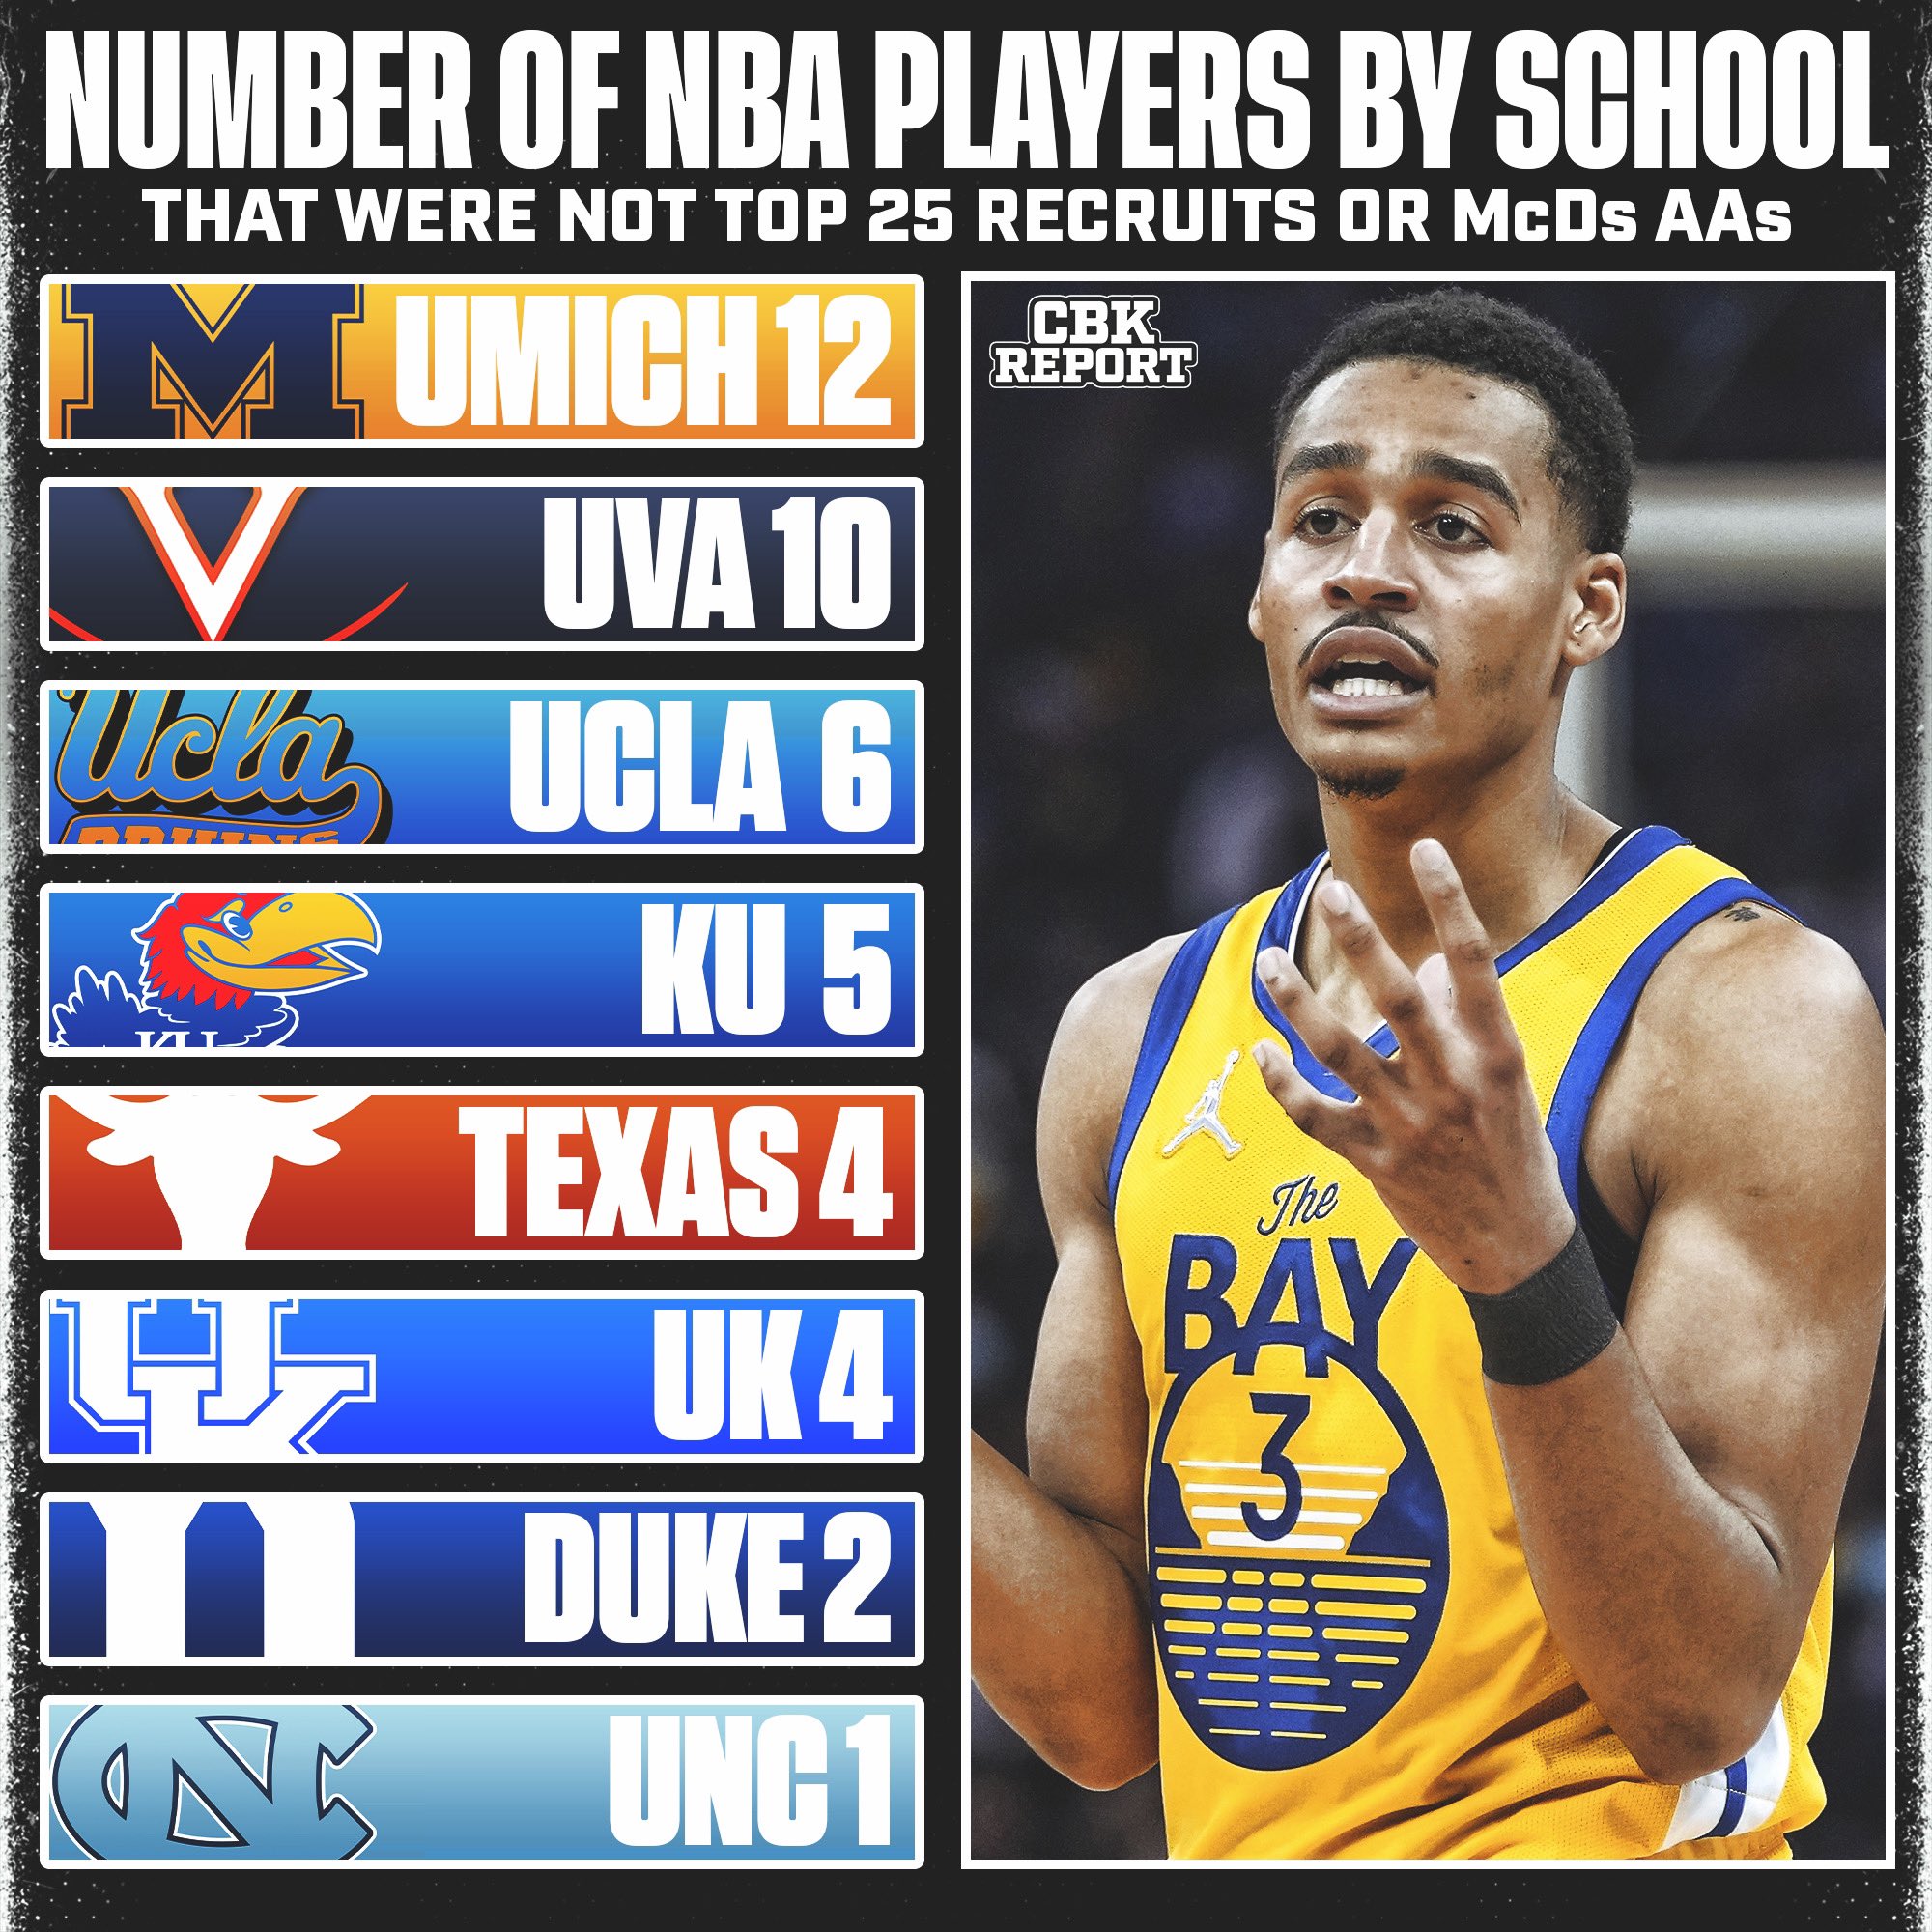 College Basketball Report on Twitter: "Number of NBA players by school were not McDonald's All Americans or Top 25 recruits. #DevelopmentU https://t.co/bm2e19gNvZ" / Twitter